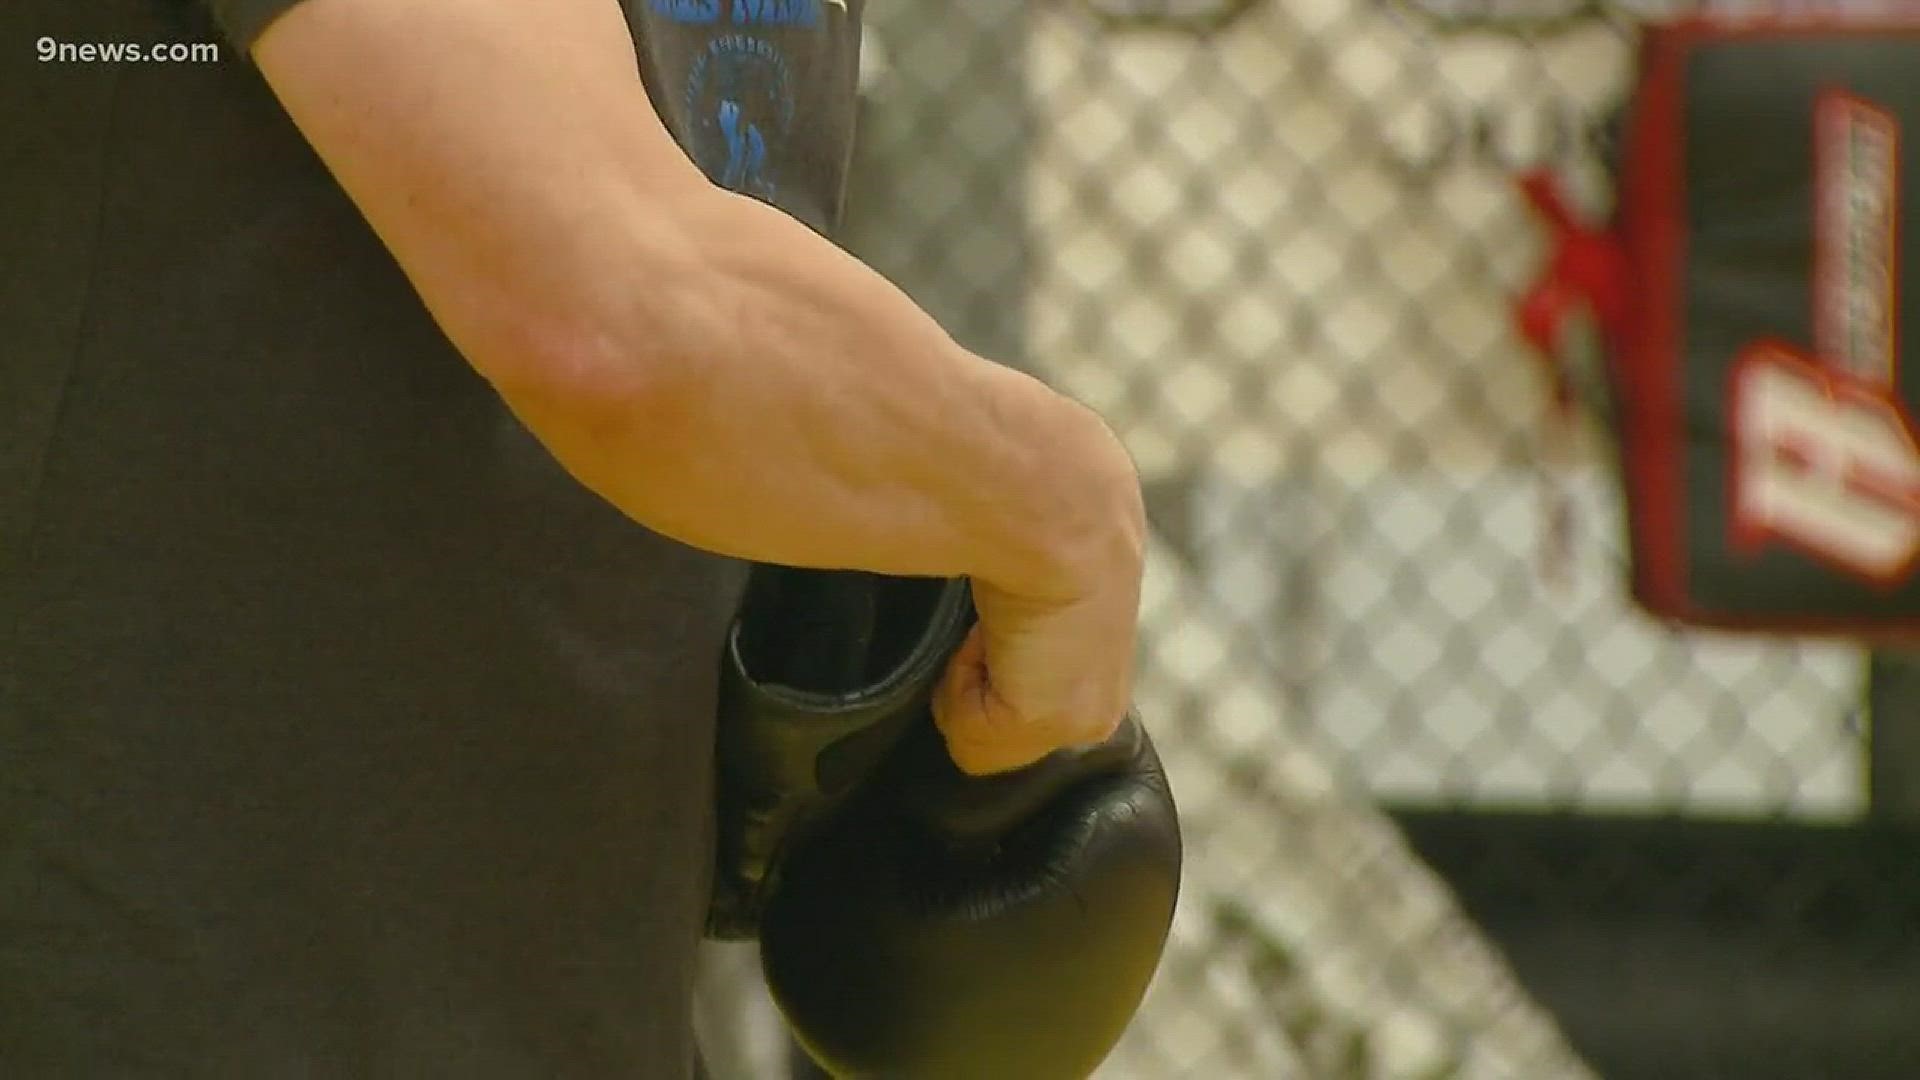 The Rock Steady Program gives people with Parkinson’s disease hope by improving their quality of life through a non-contact boxing based fitness curriculum.